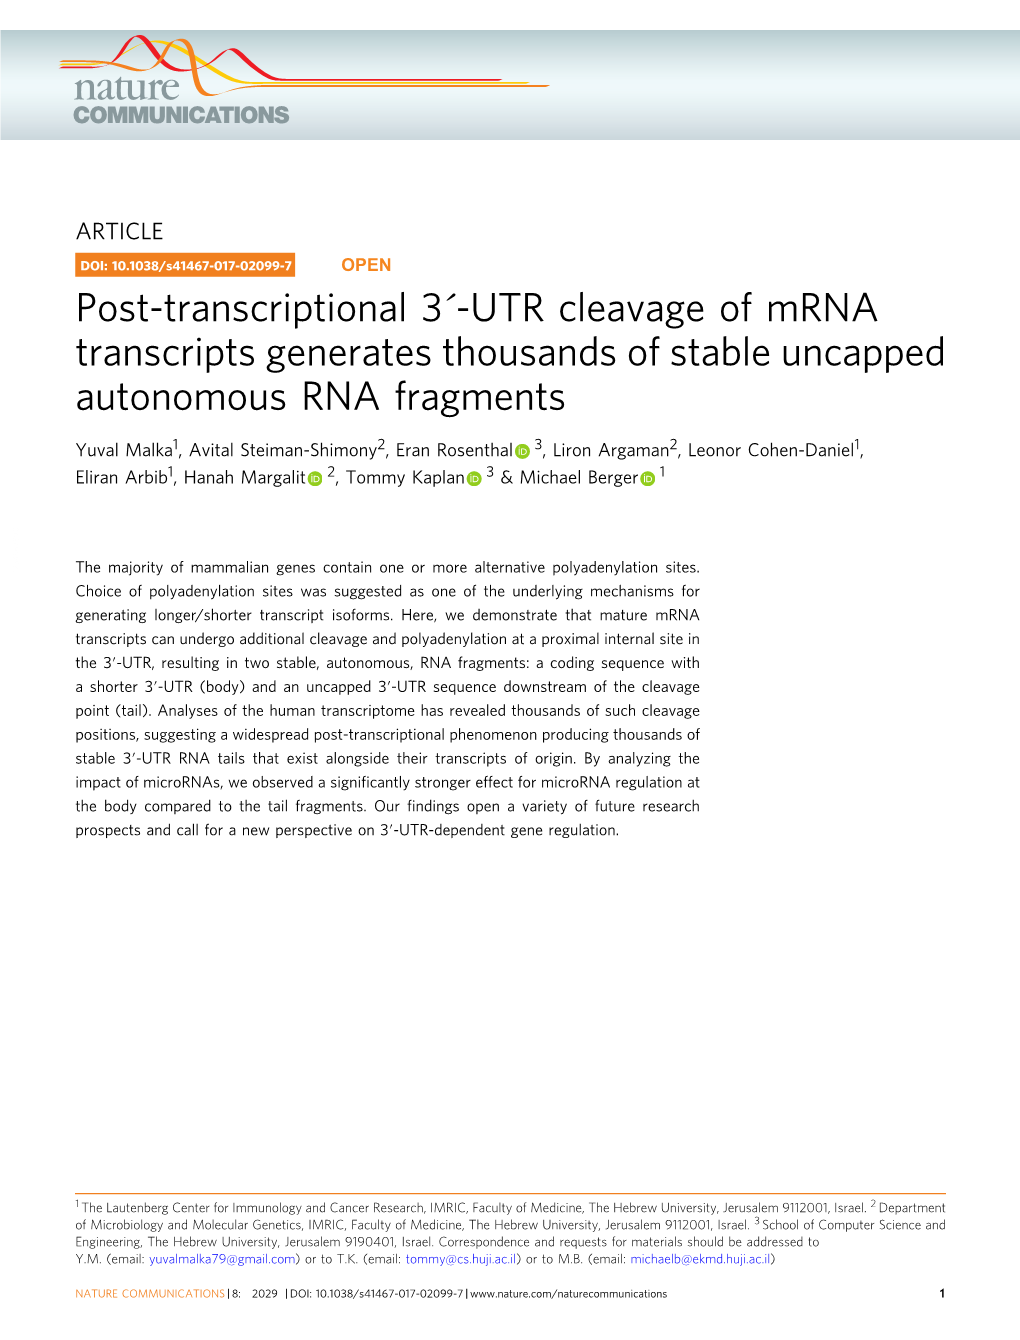 UTR Cleavage of Mrna Transcripts Generates Thousands of Stable Uncapped Autonomous RNA Fragments